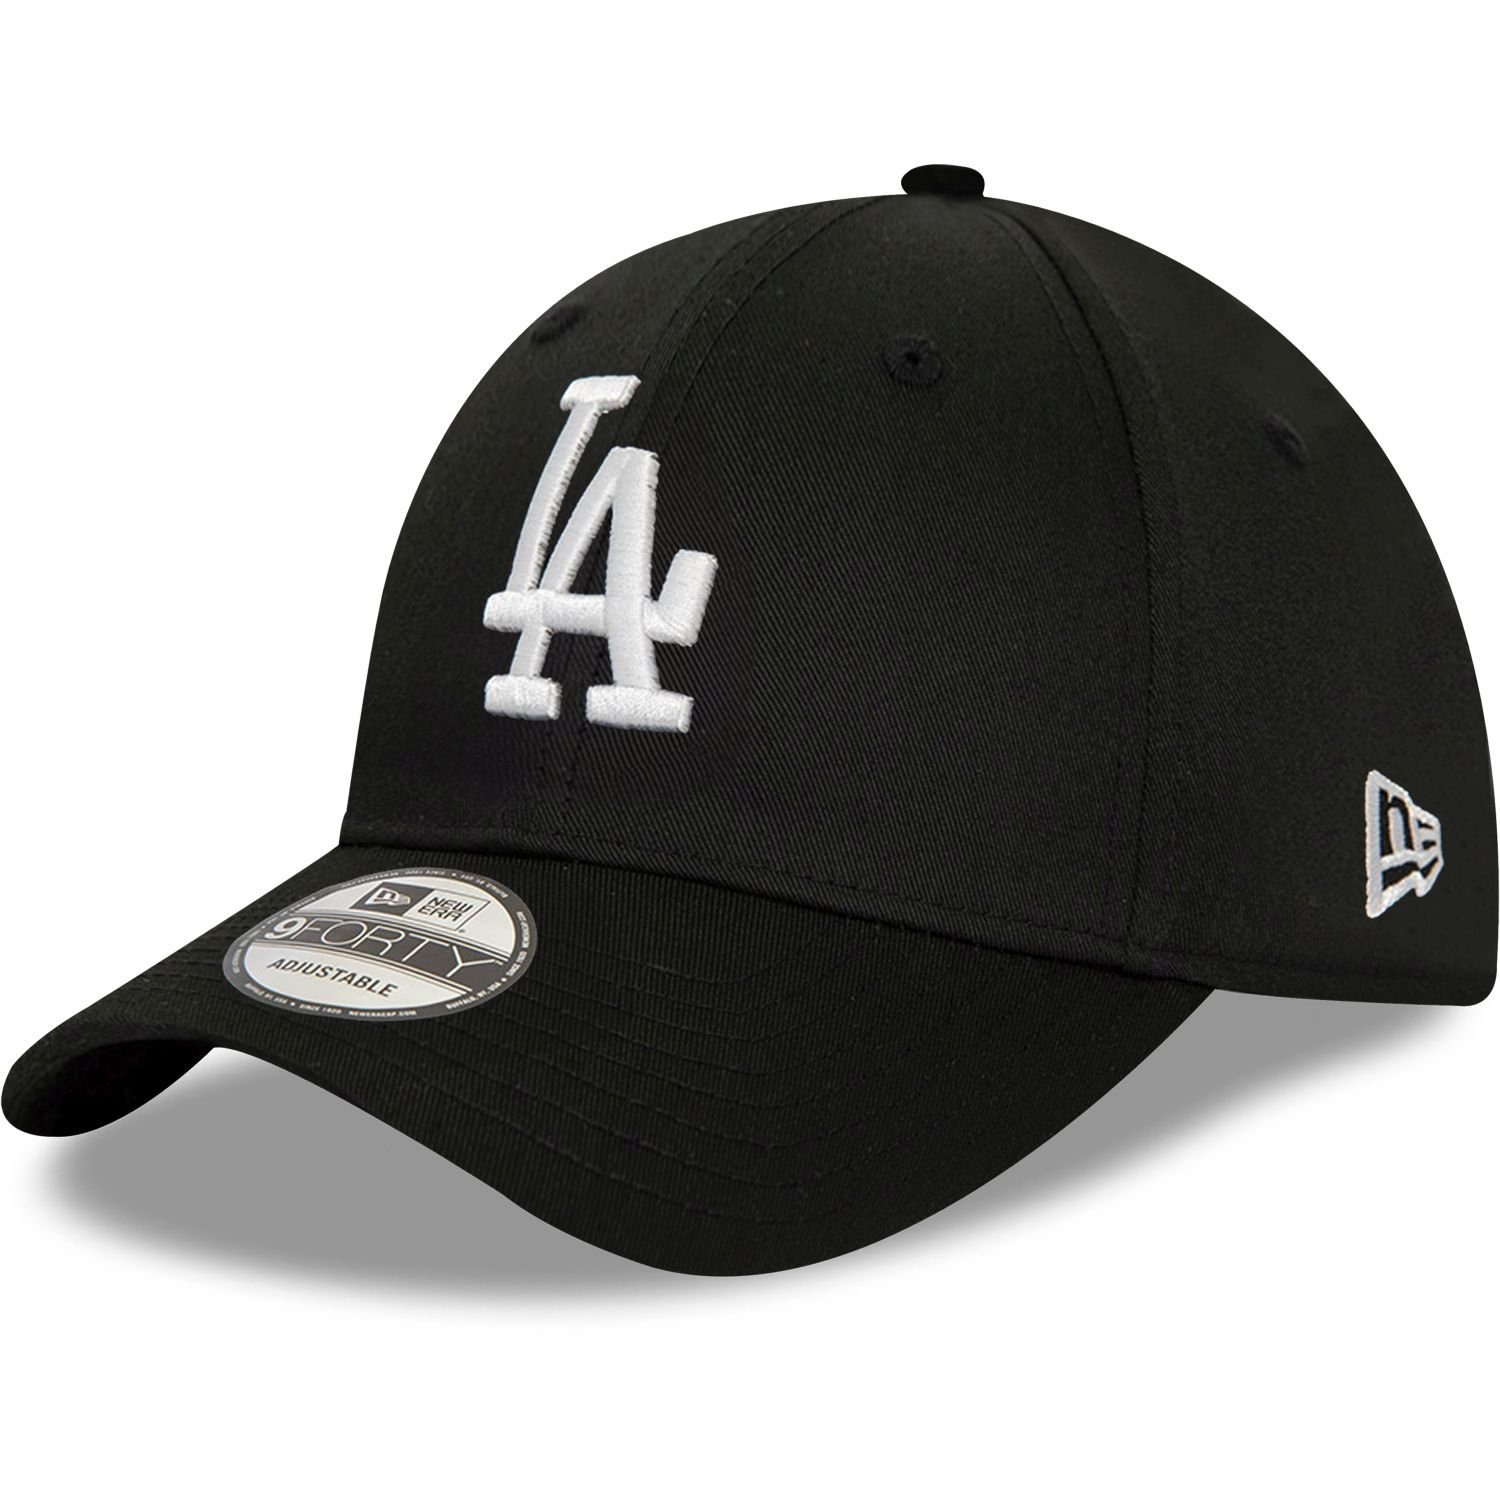 Era 9Forty Angeles Baseball New Dodgers SIDEPATCH Los Cap